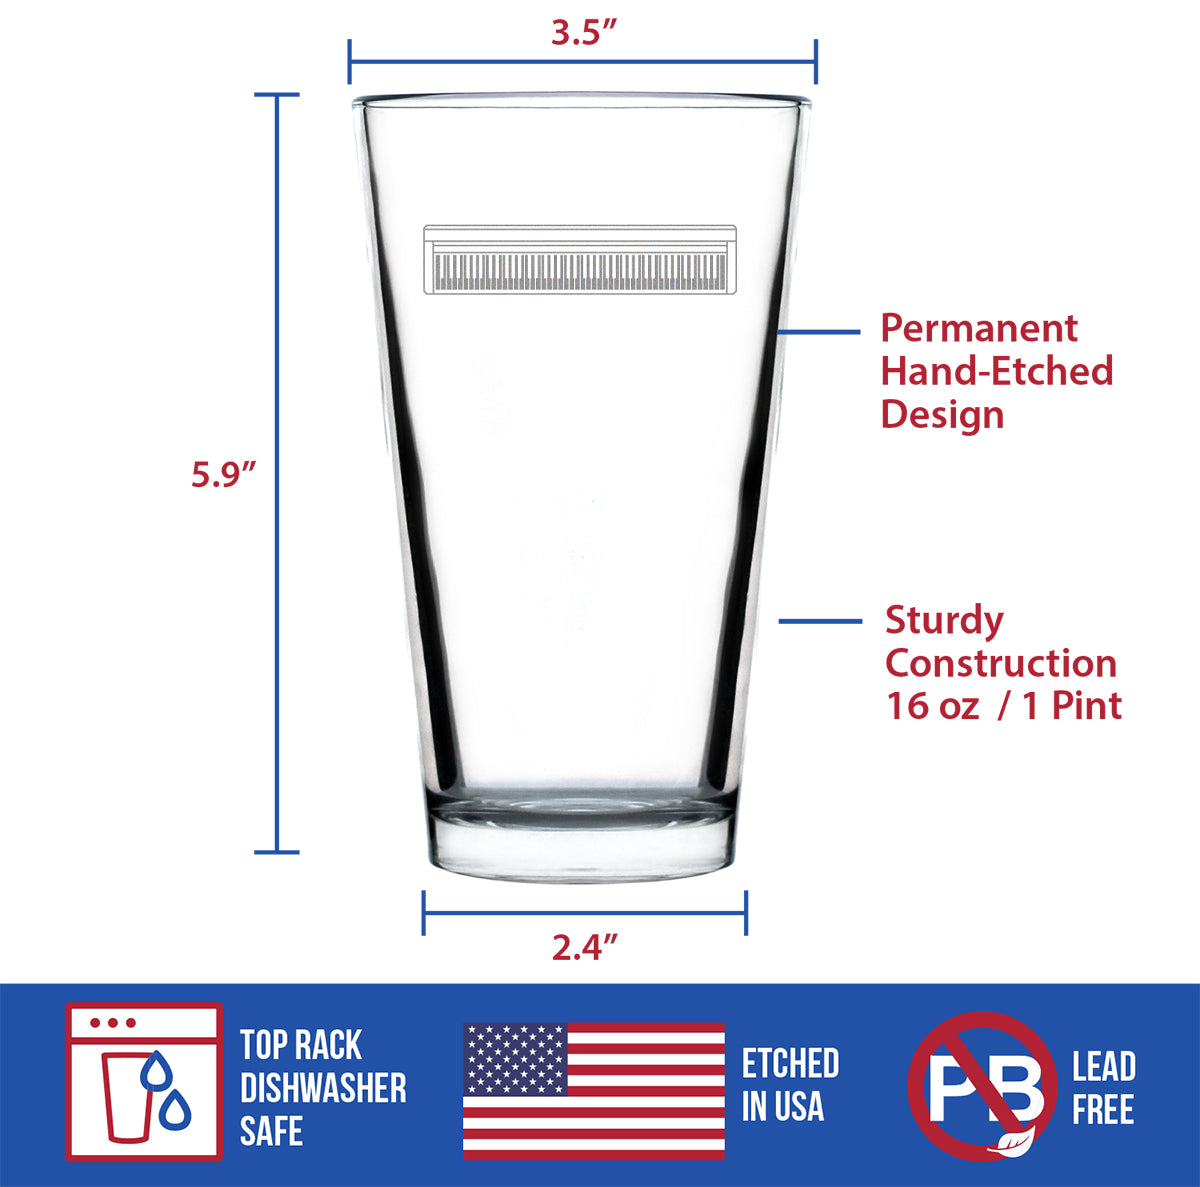 Piano Keyboard Pint Glass for Beer - Music Gifts for Musicians, Teachers and Musical Accessories for Women and Men that Play Keys - 16 Oz Glasses